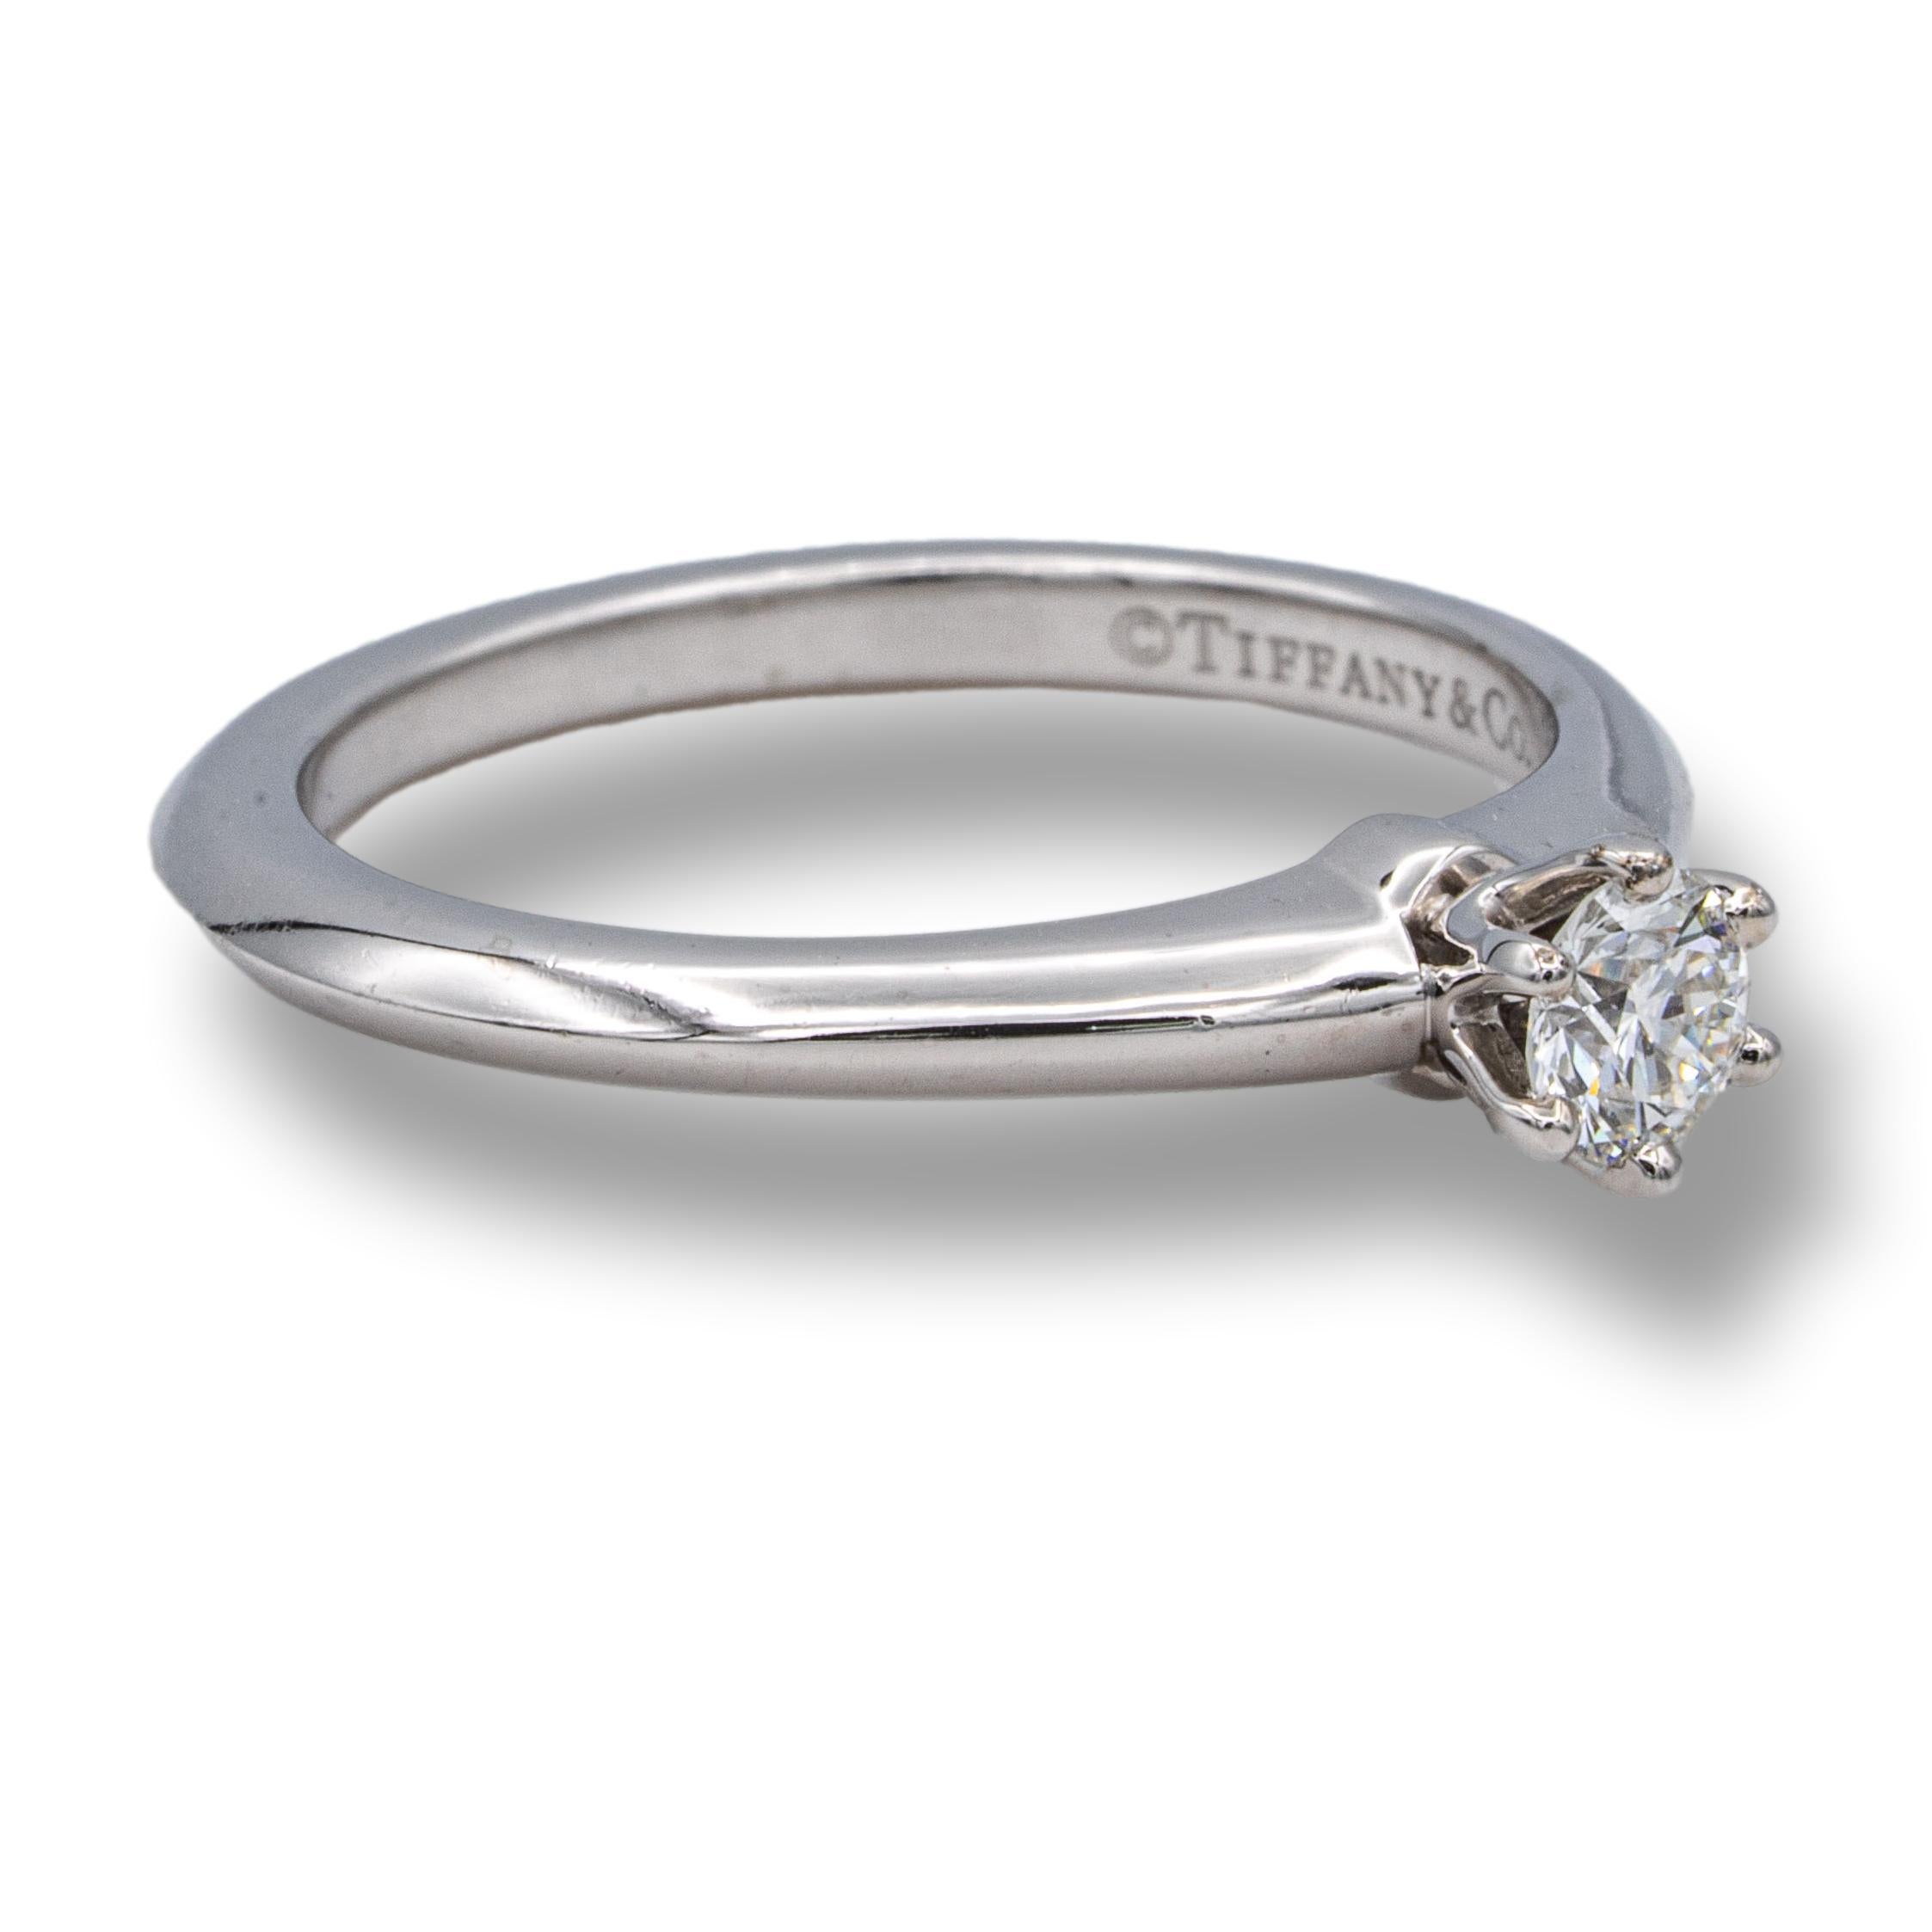 Tiffany & Co. Solitaire engagement ring with a round brilliant cut diamond center weighing 0.23 carats I color VVS1 clarity. Fully Hallmarked and diamond is inscribed.

RING SPECIFICATIONS:
Brand: Tiffany & Co.
Hallmarks: Tiffany & Co. PT950